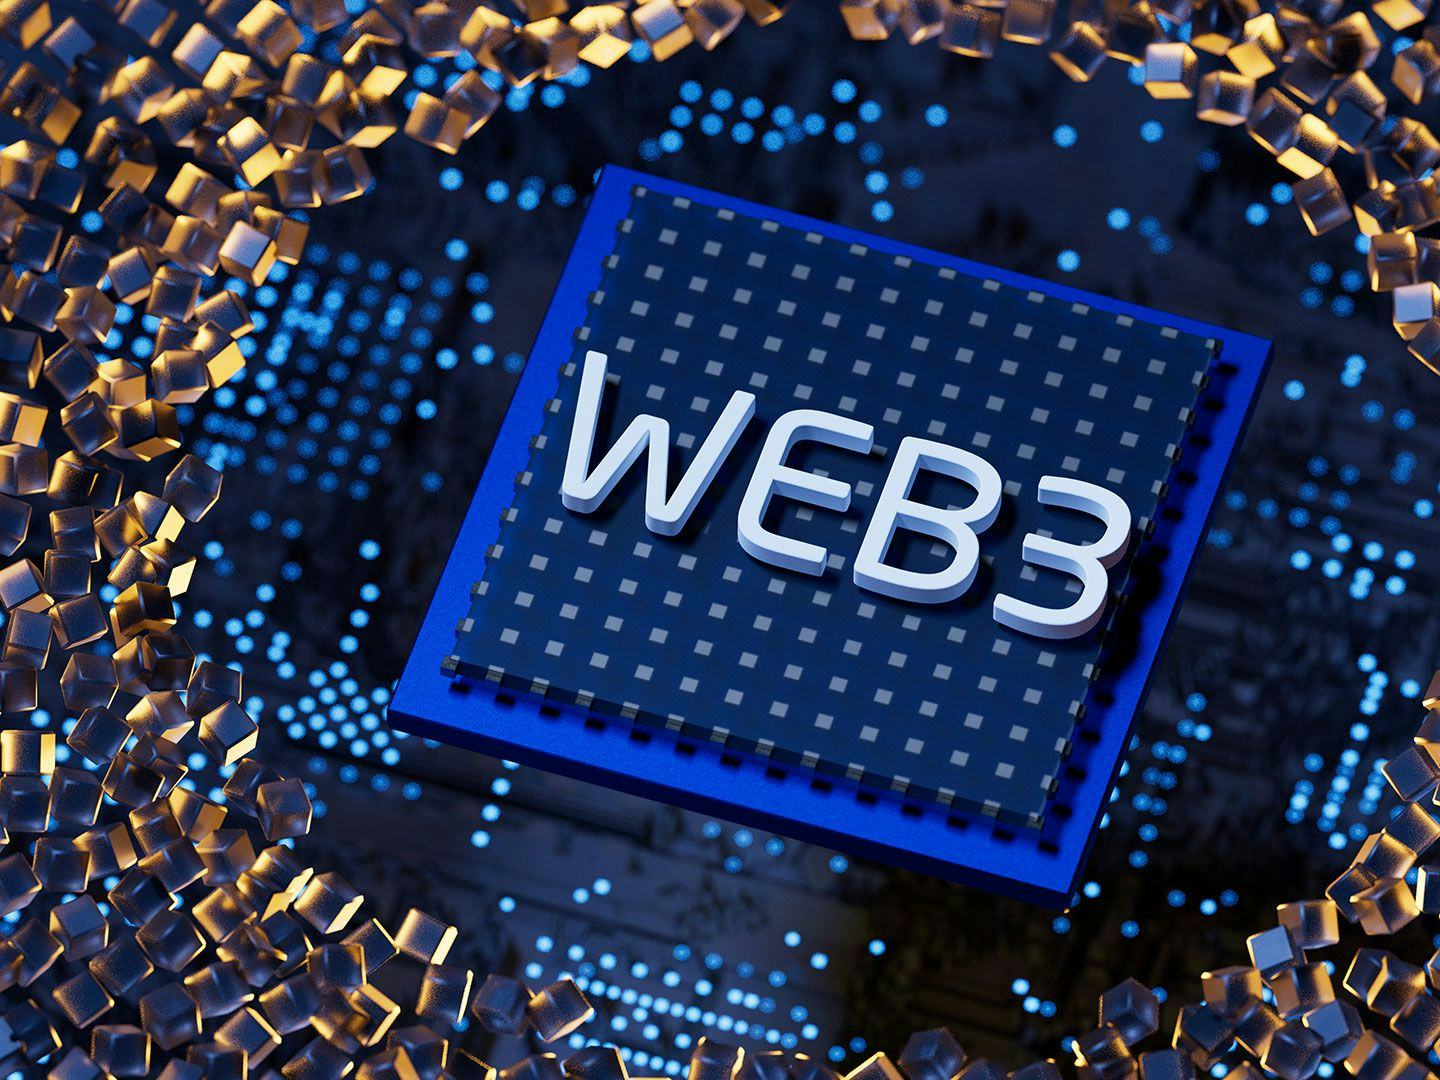 What is Web3?